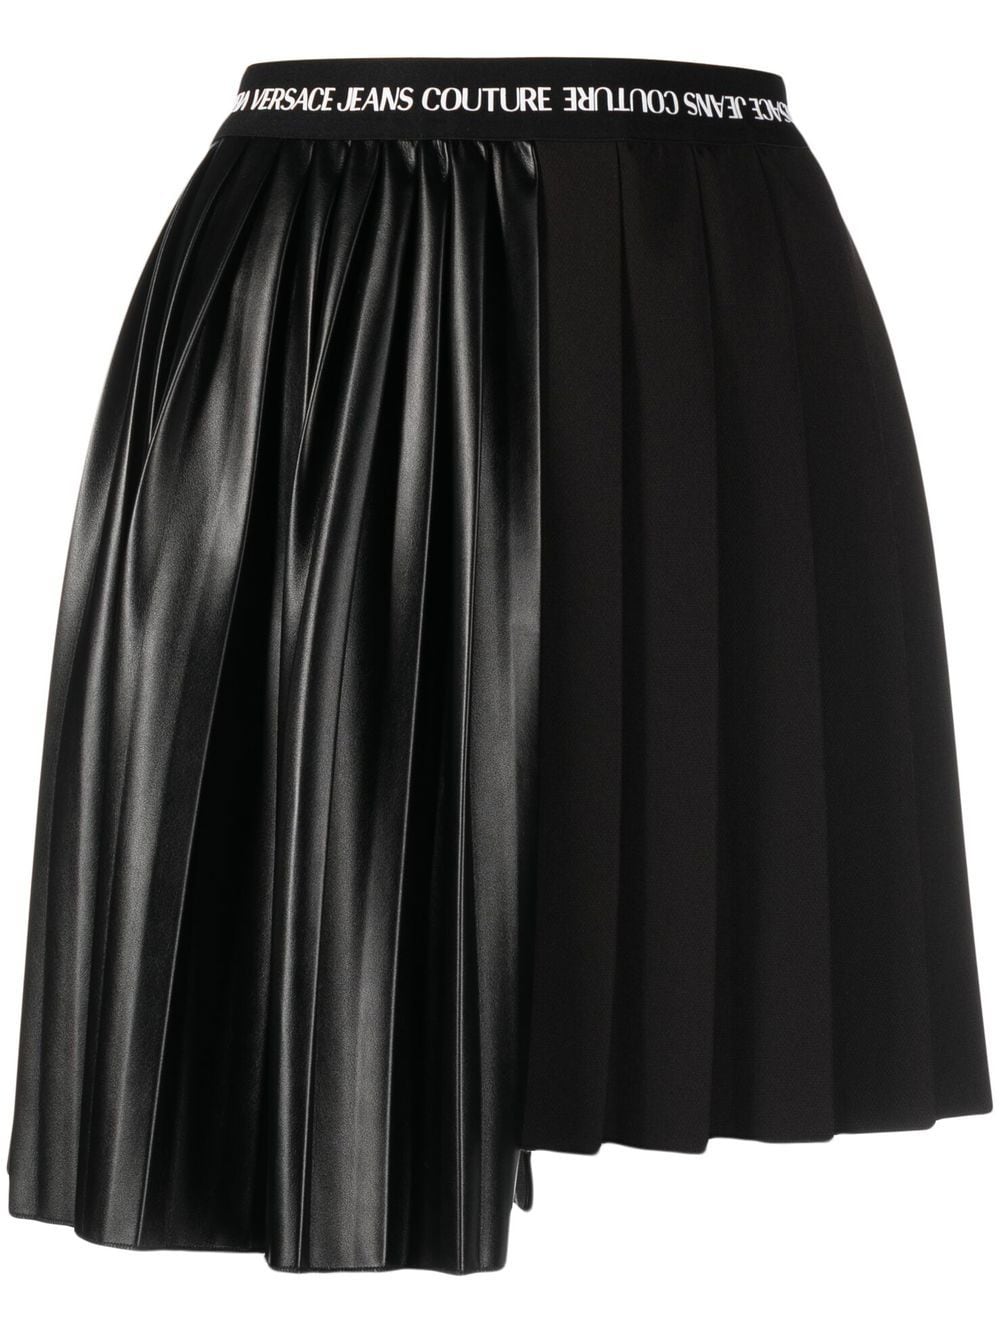 VERSACE JEANS COUTURE ASYMMETRIC PLEATED MINI SKIRT